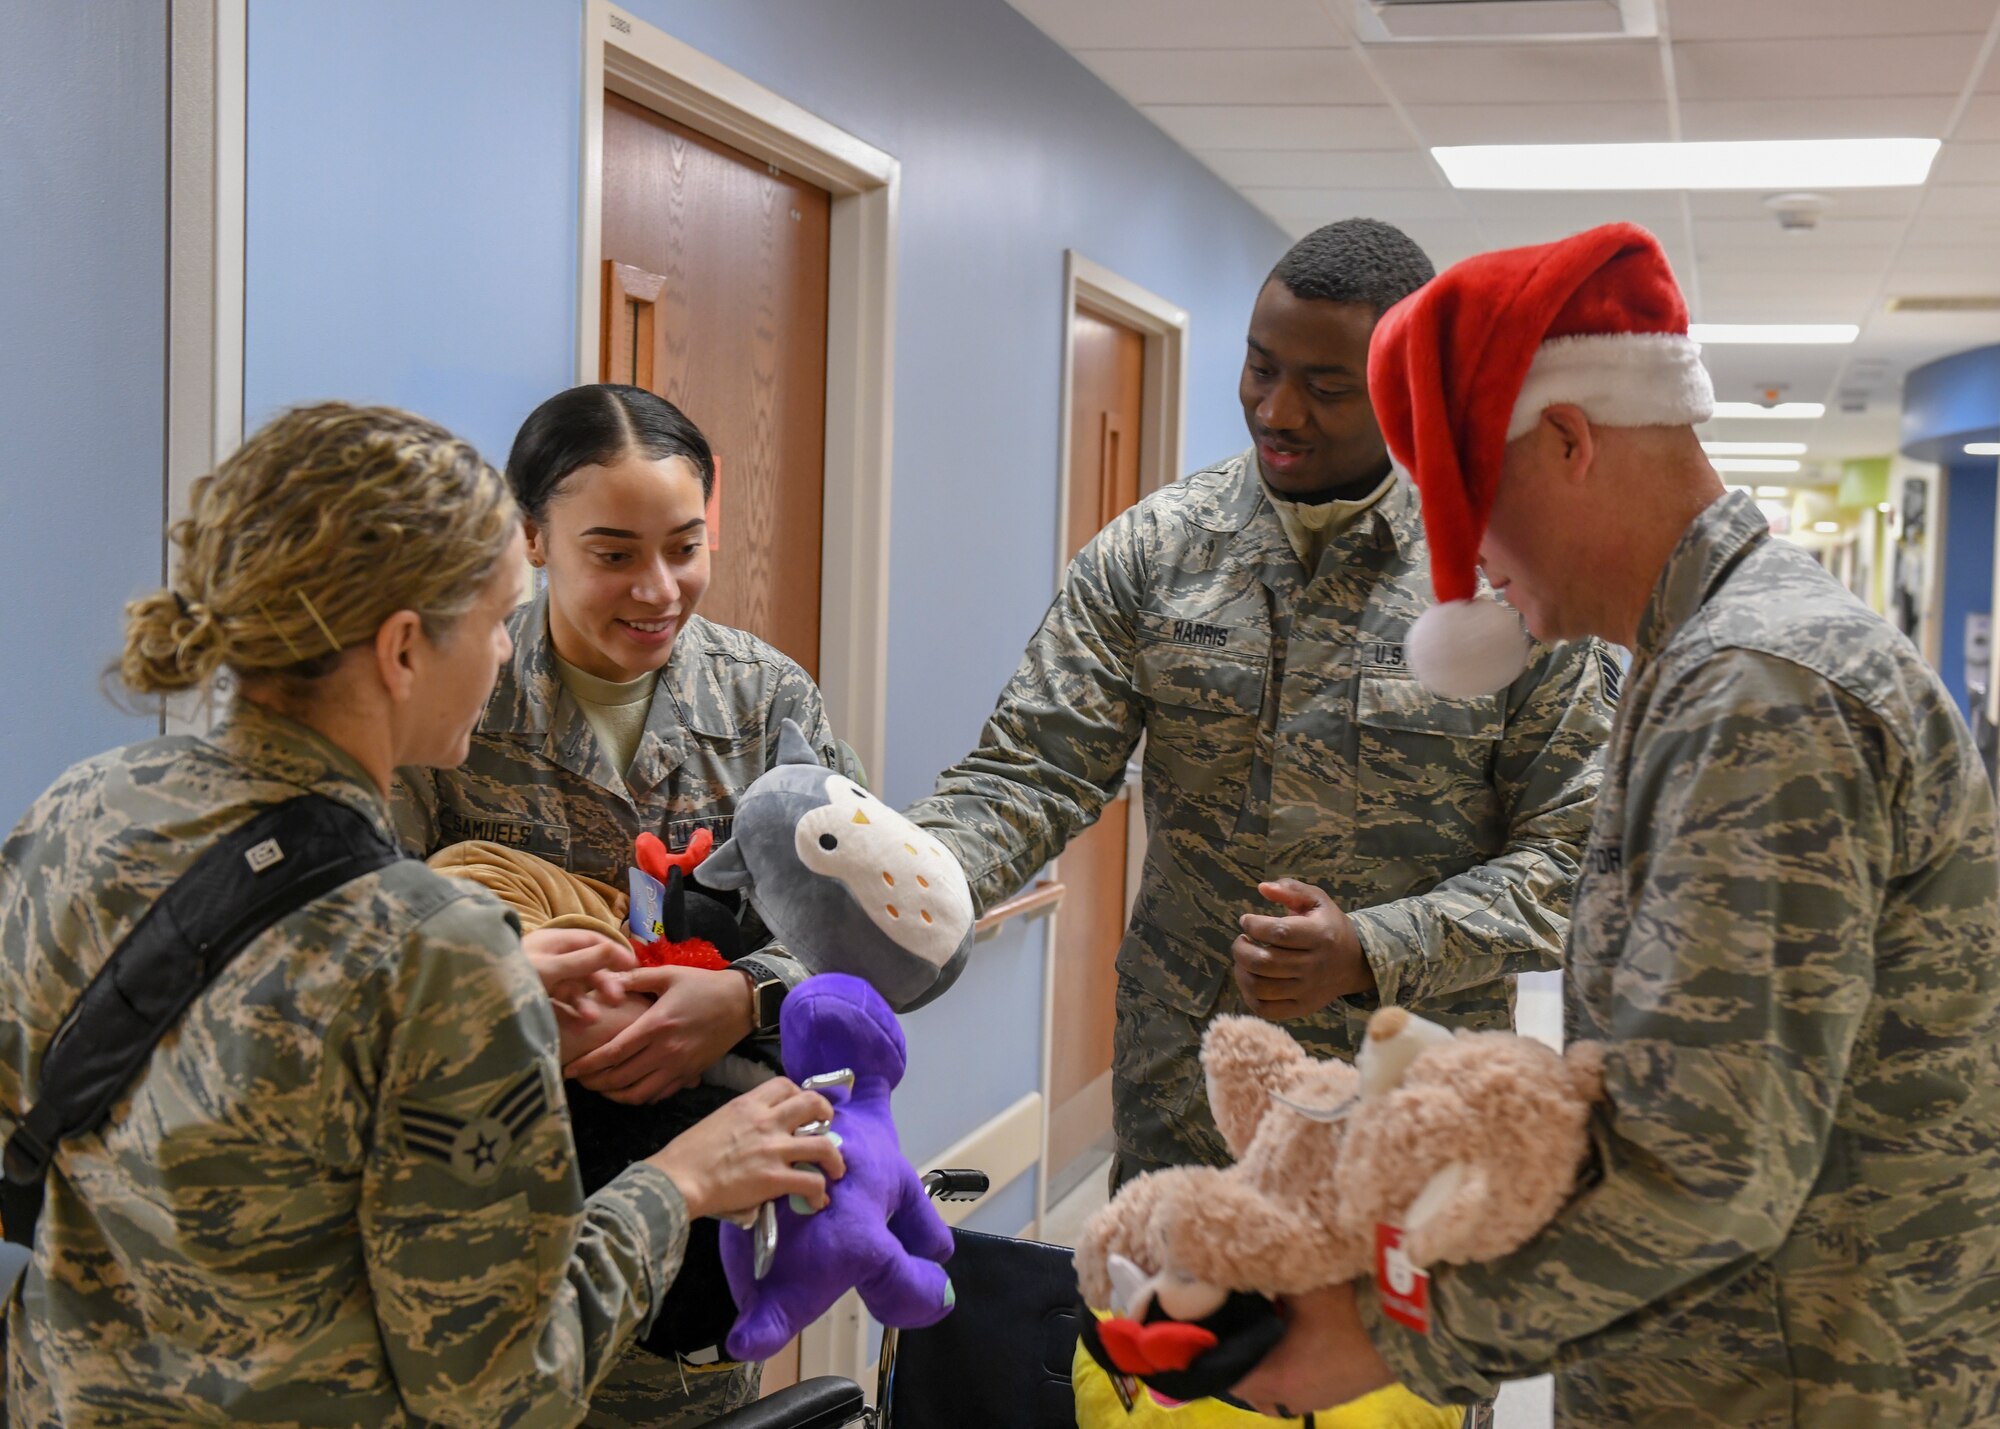 Five members of the 910th Airlift Wing and one Sailor from the Navy Operations Support Center Youngstown visited more than 30 children at Akron Children's Hospital's Boardman, Ohio campus Dec. 18, 2018.